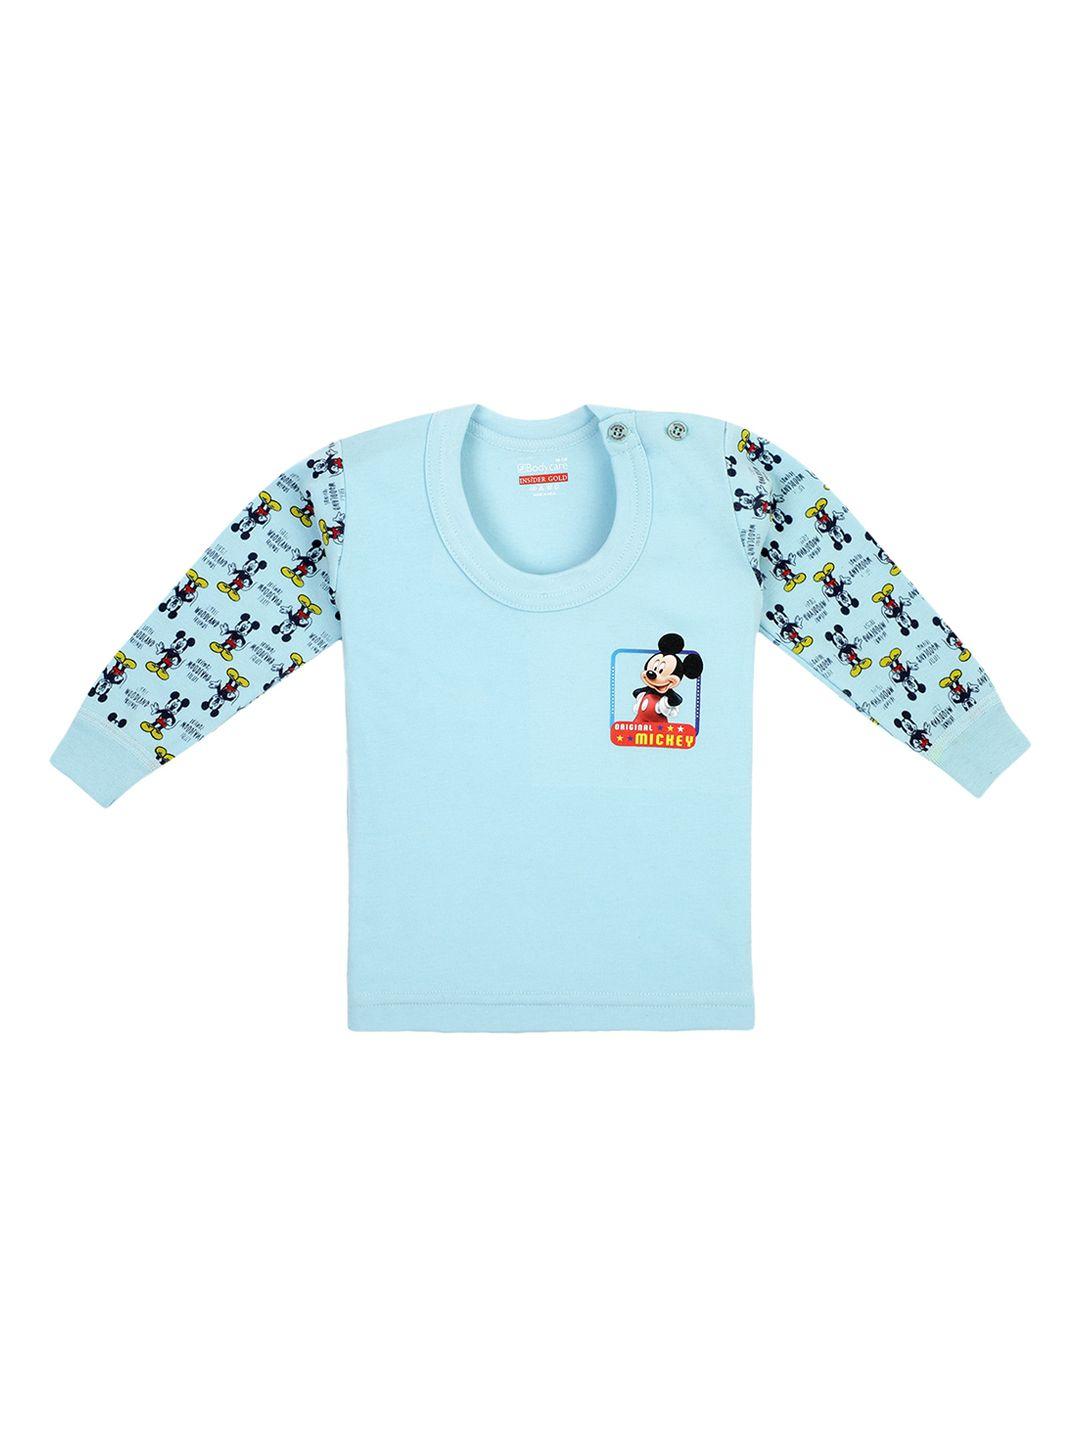 bodycare-kids-infants-blue-printed-cotton-thermal-tops